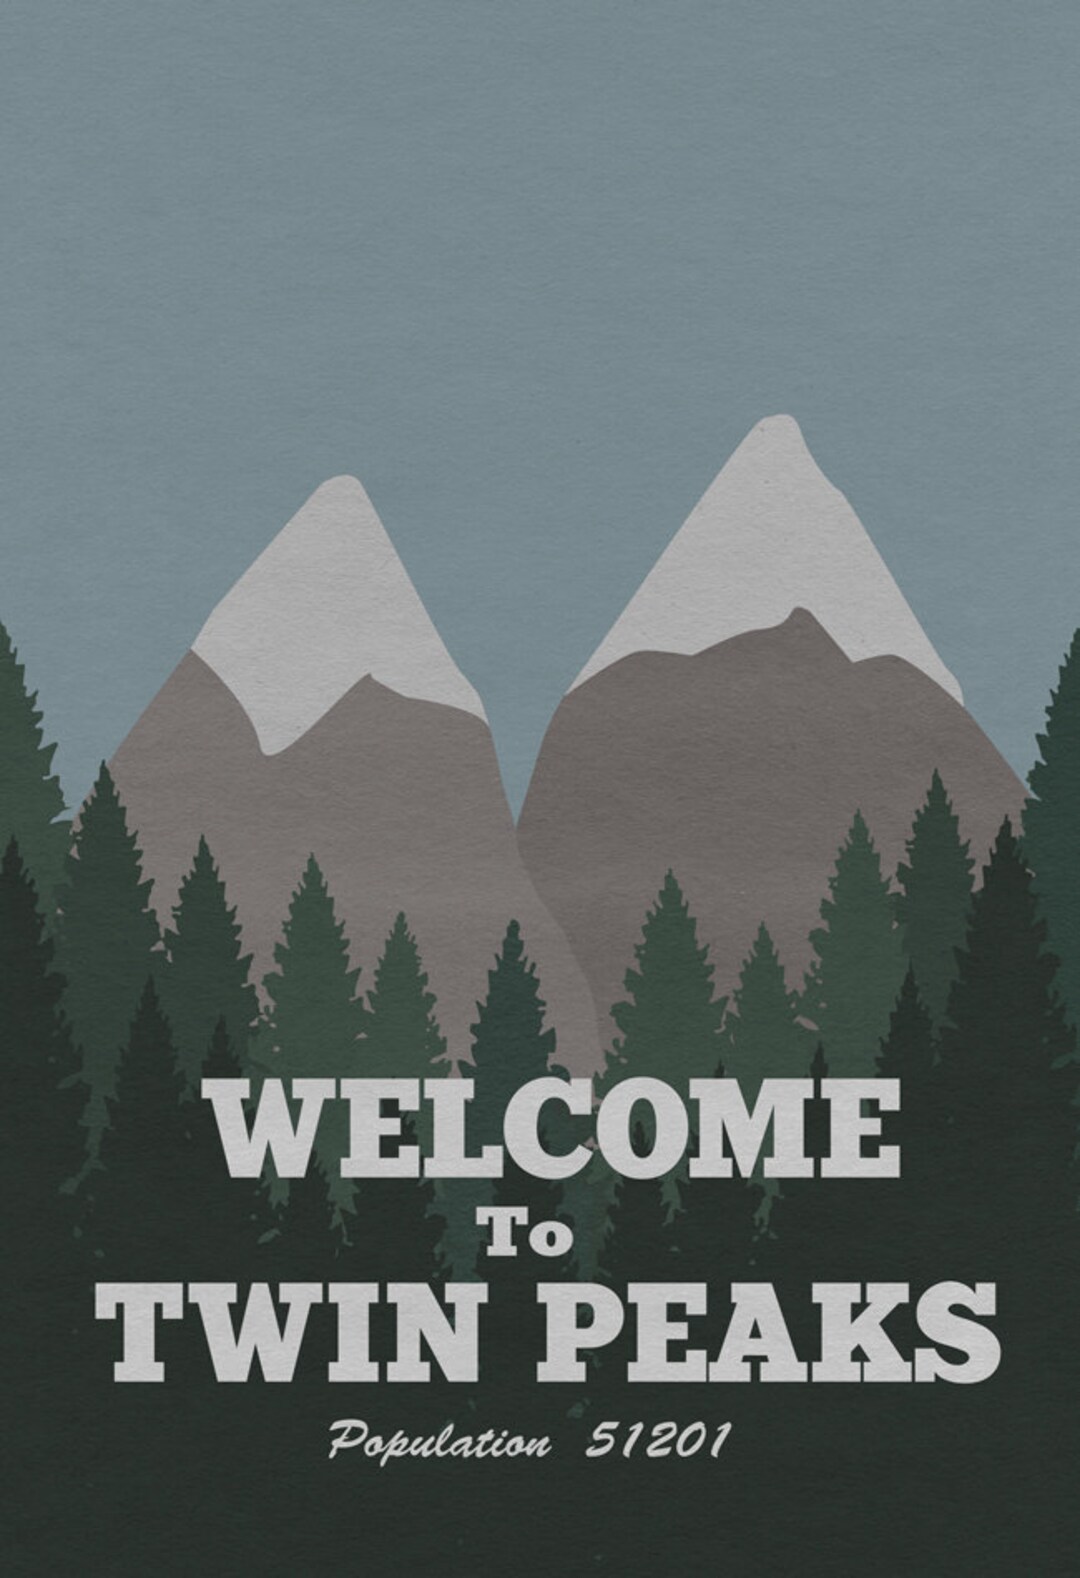 Welcome to Twin Peaks Poster 8x10 11x17 or 13x19 TV - Etsy